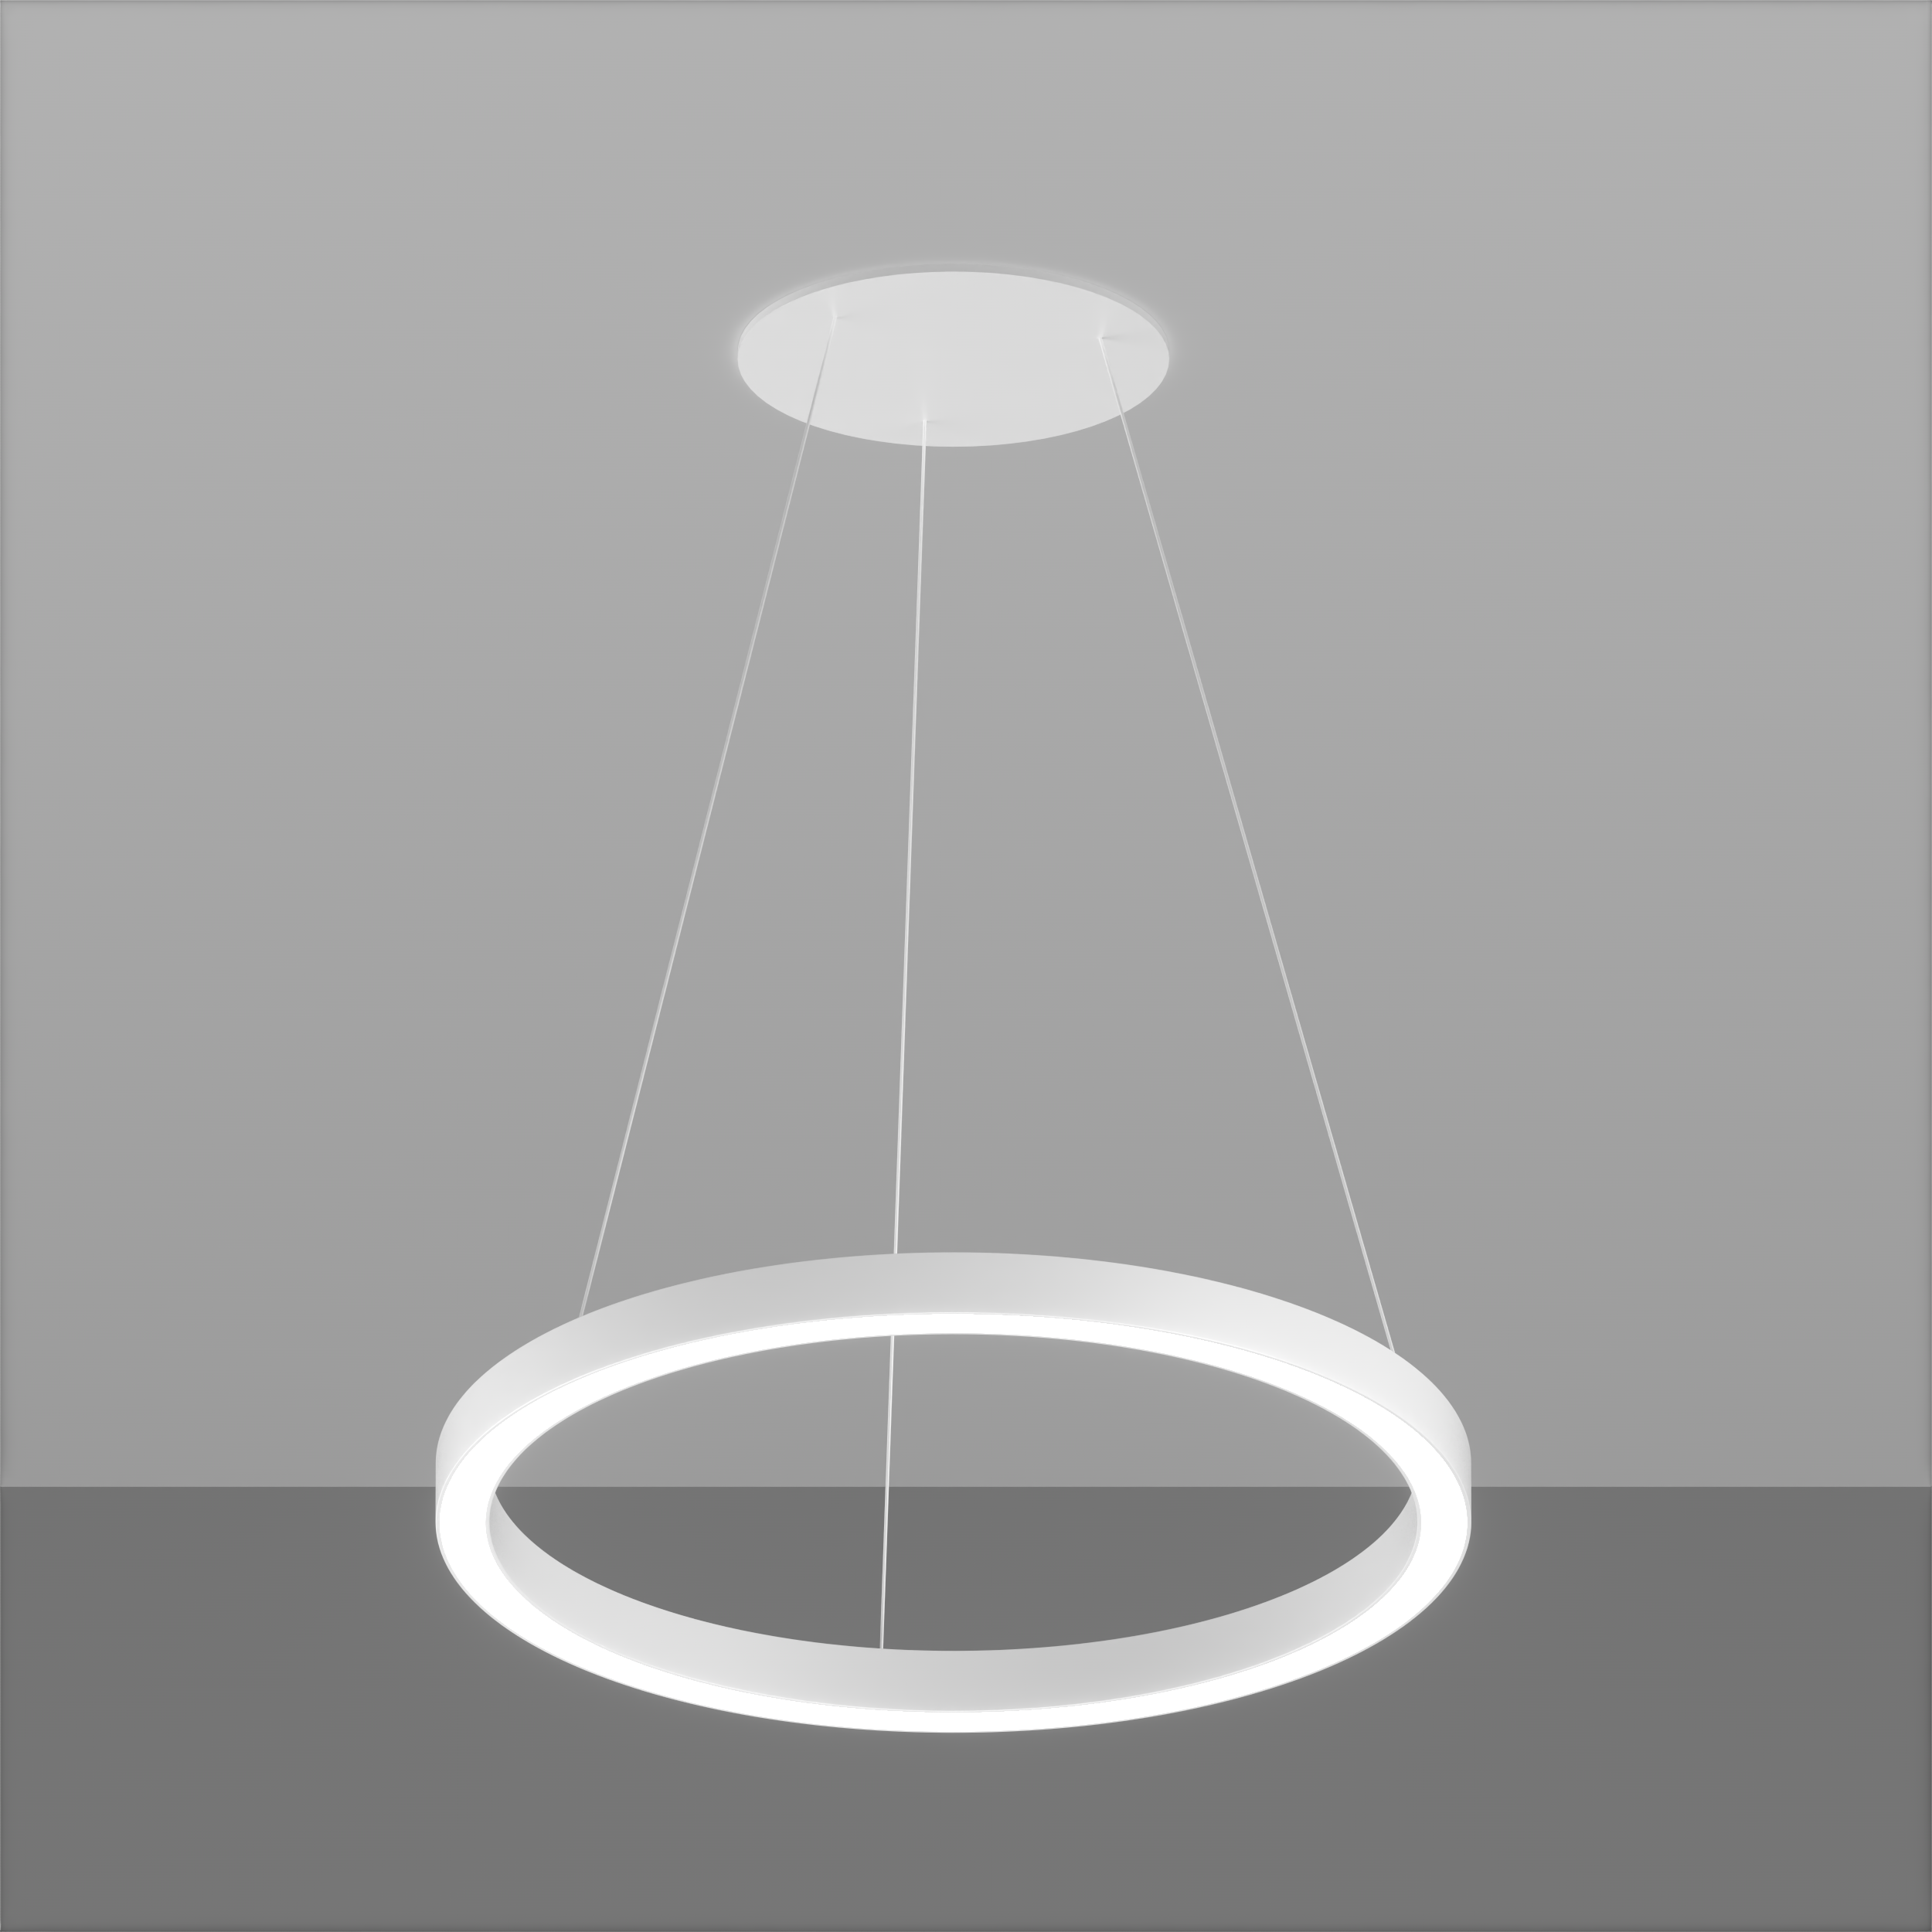 Central Canopy Suspended - LED Ring Pendant